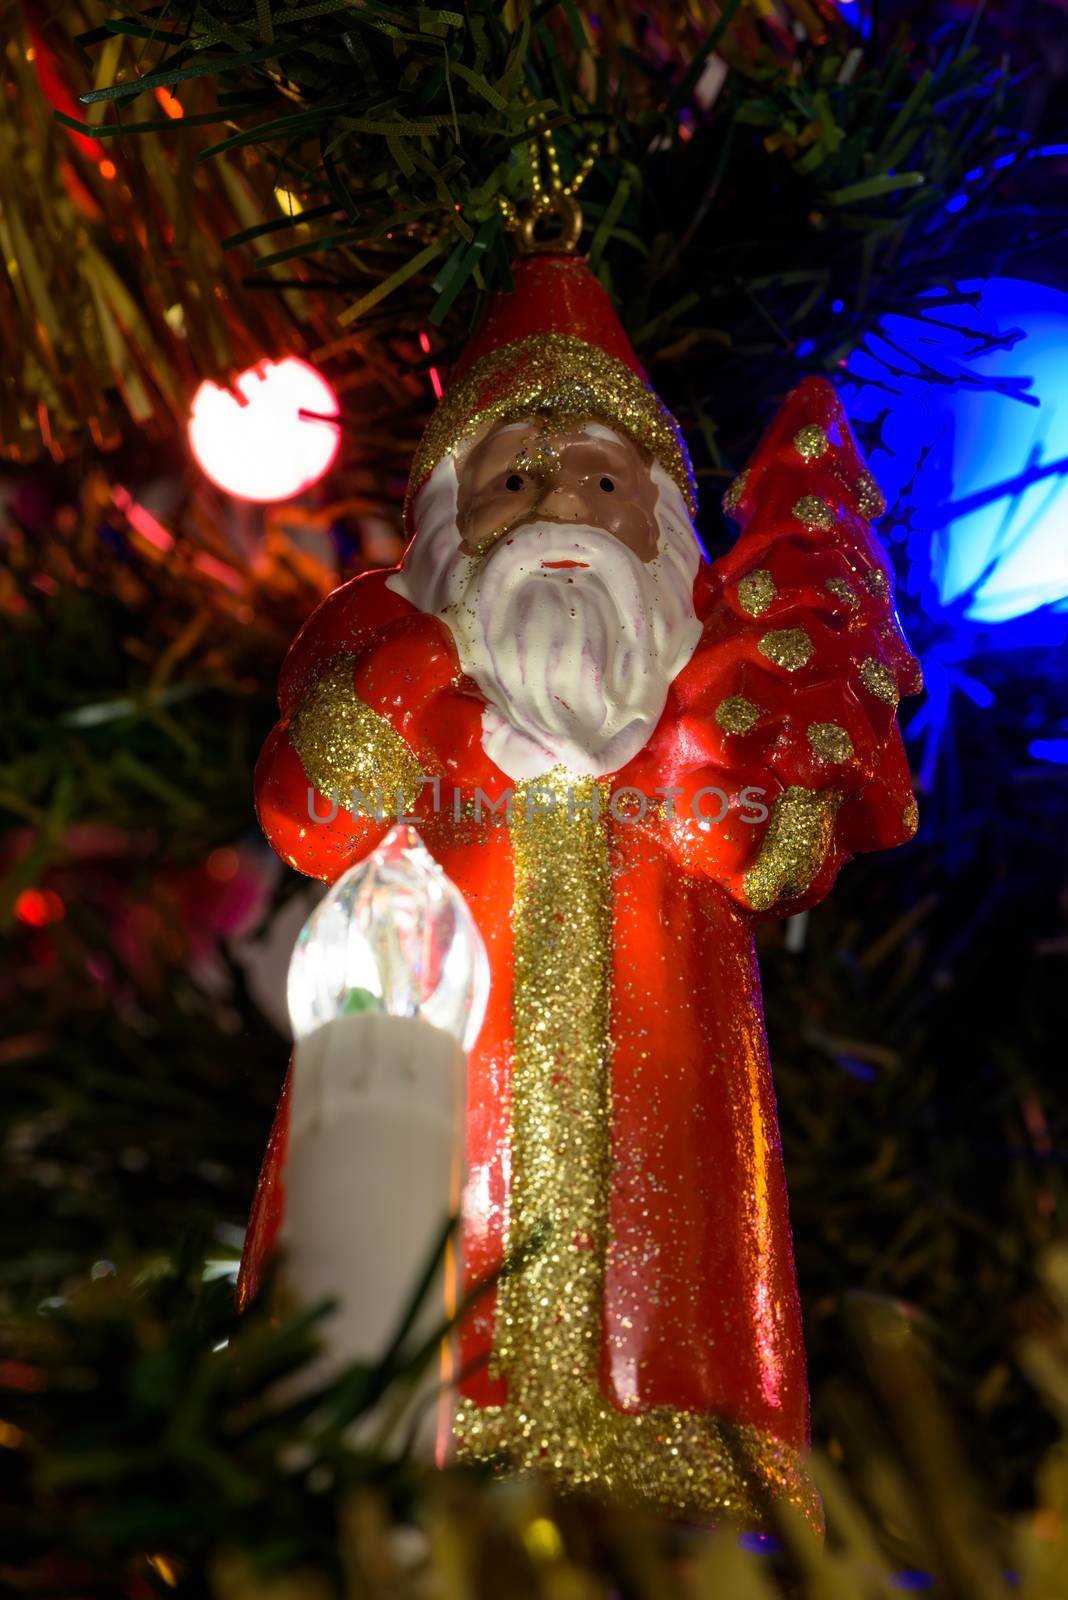 Closeup of Santa Claus figure on a Christmas tree as background